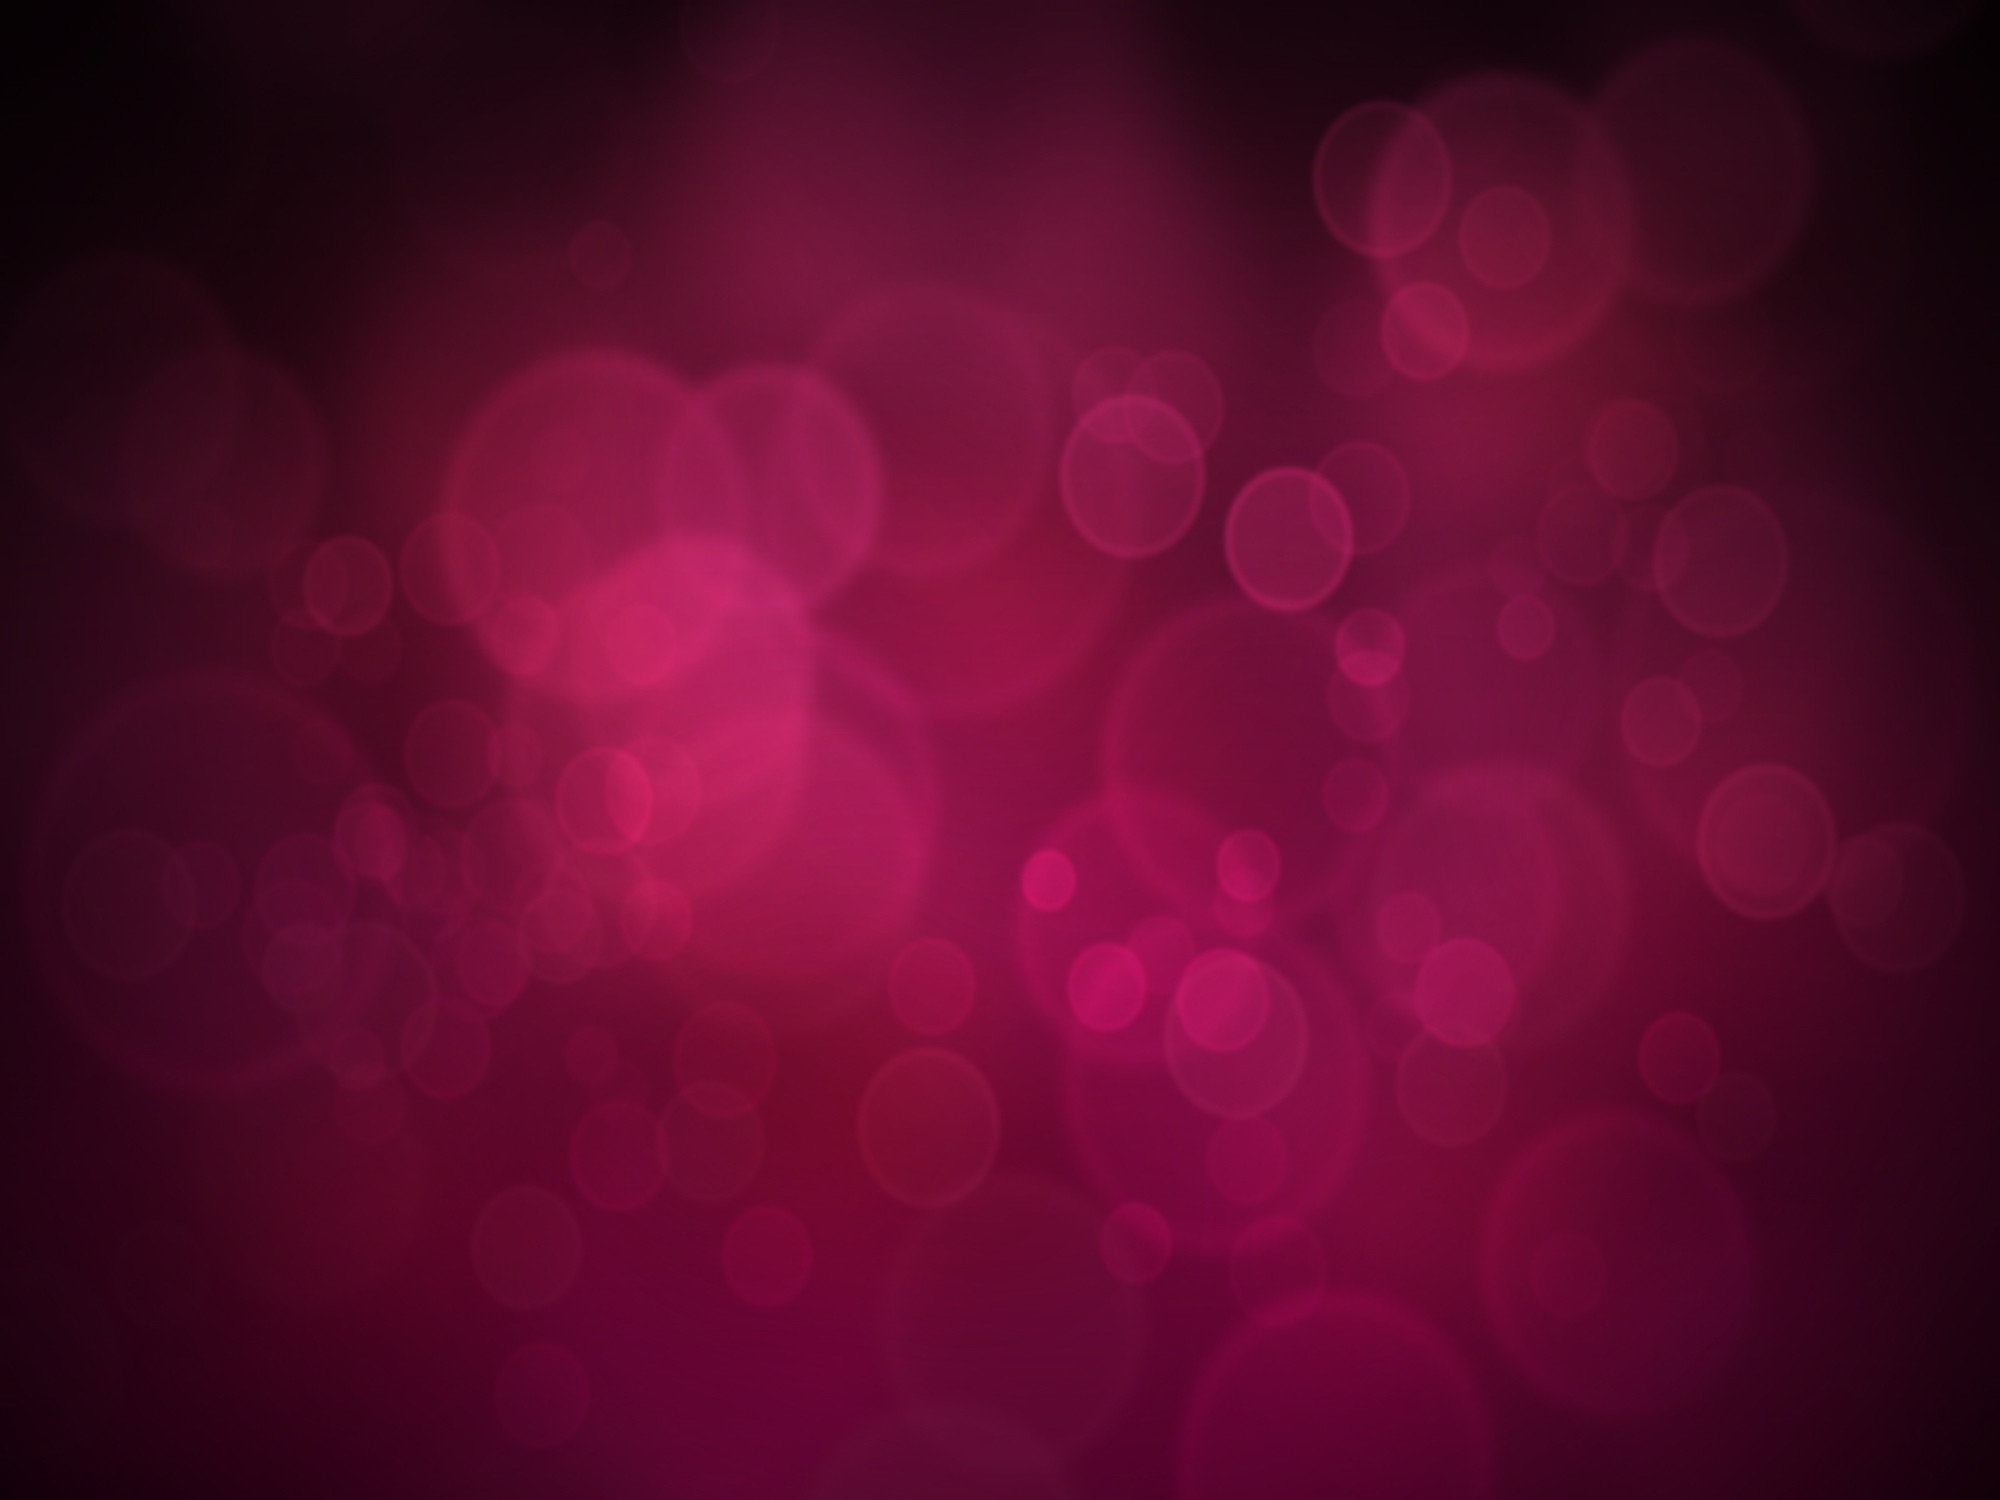 2000x1500 wallpaper-points-pink-black-background-bubbles-reflections-background.jpg